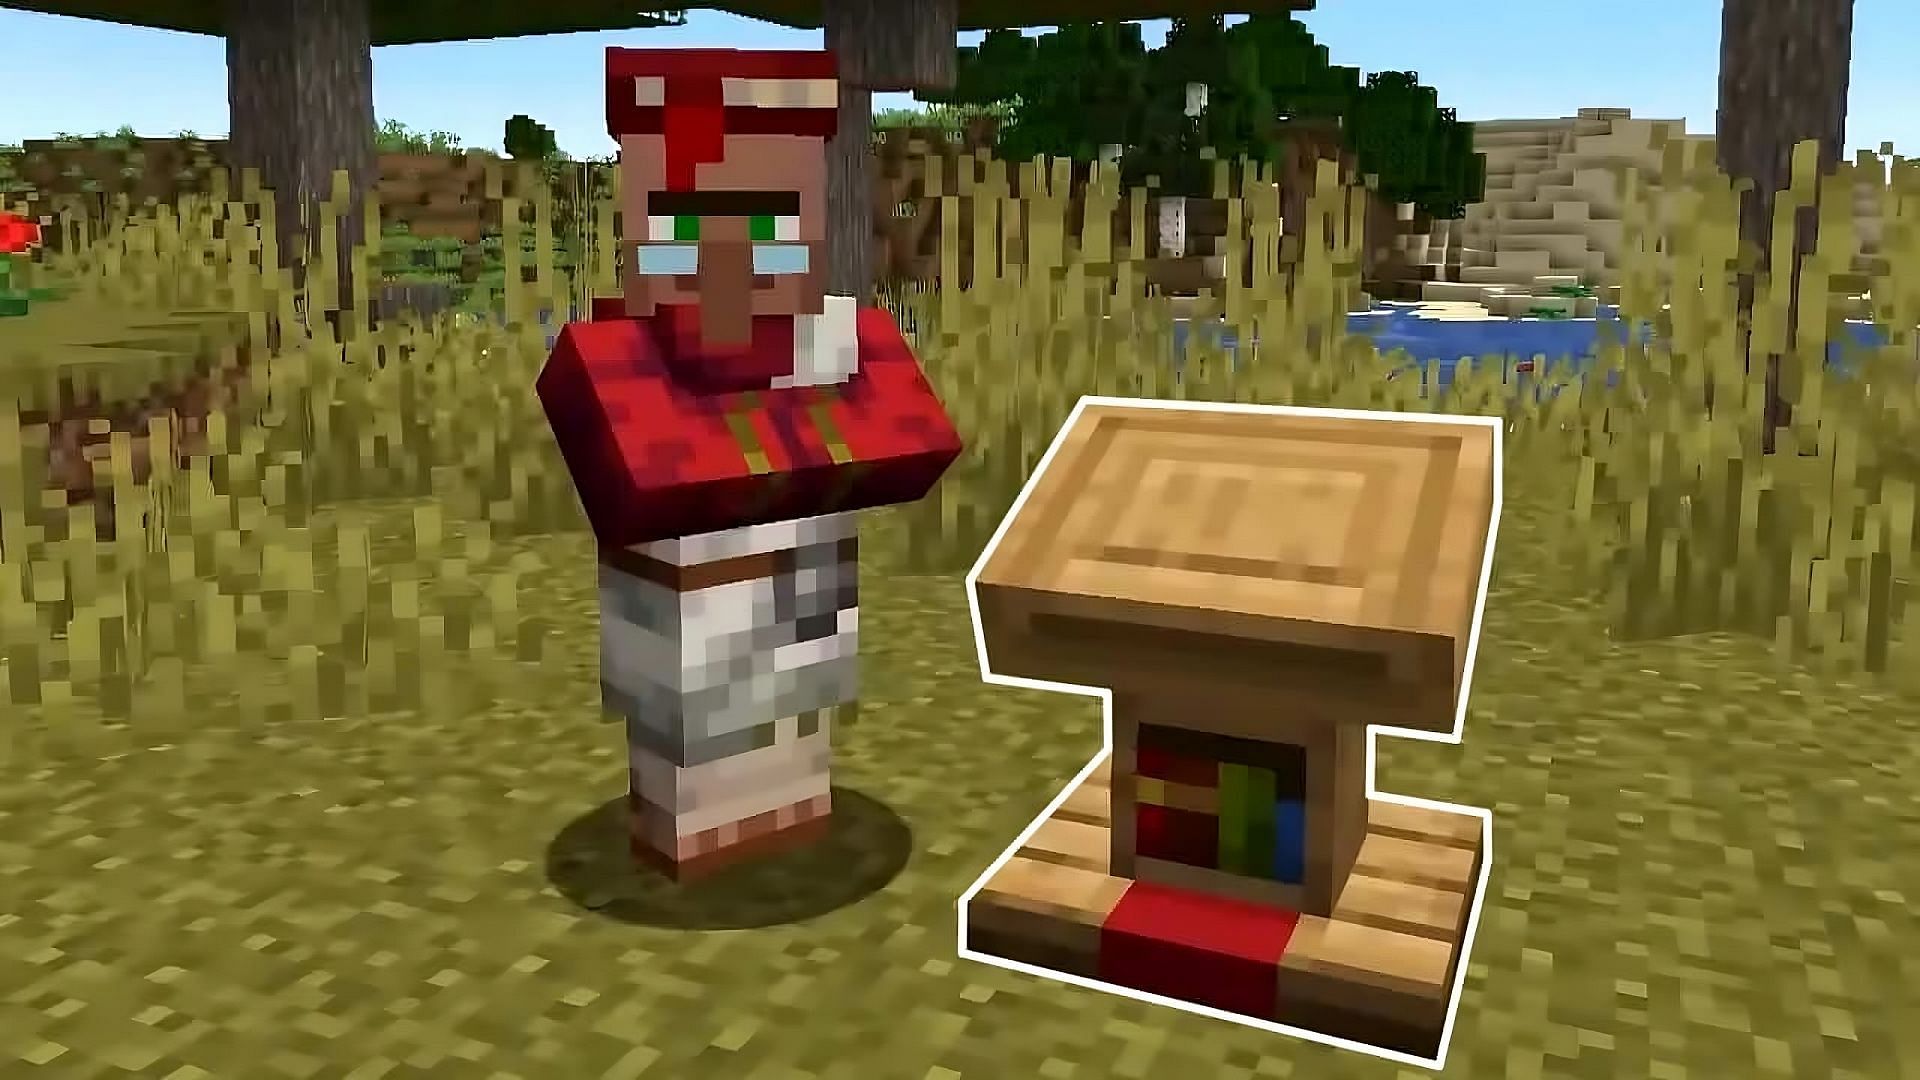 Librarian villagers have received some pretty impactful changes in recent Minecraft betas (Image via Mojang)